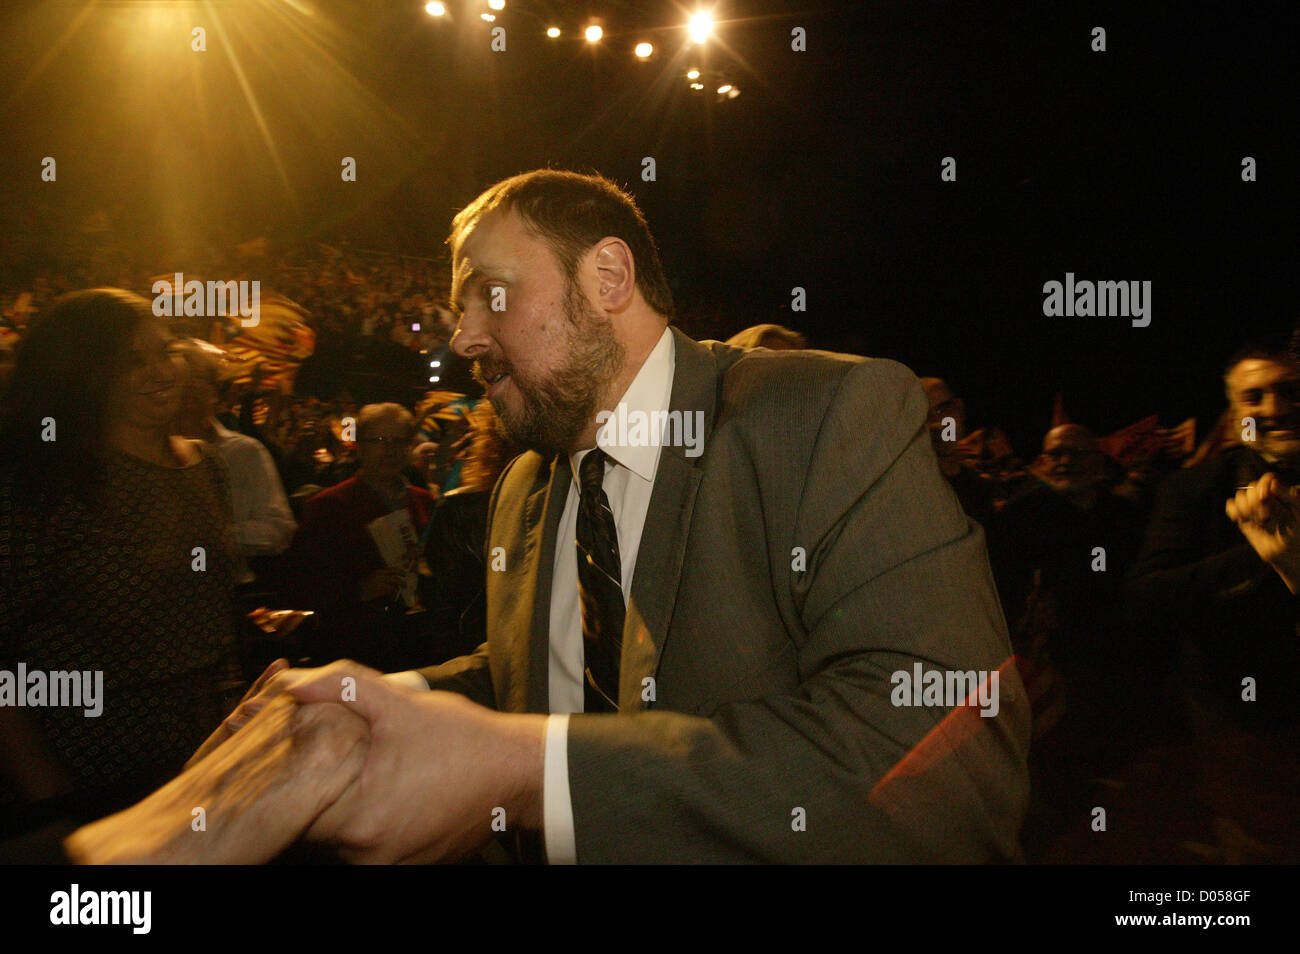 Barcelona, Catalonia, Spain. ERC candidate, Oriol Junqueras, arriving to the central act of electoral campaing at BTM. Credit:  esteban mora / Alamy Live News Stock Photo